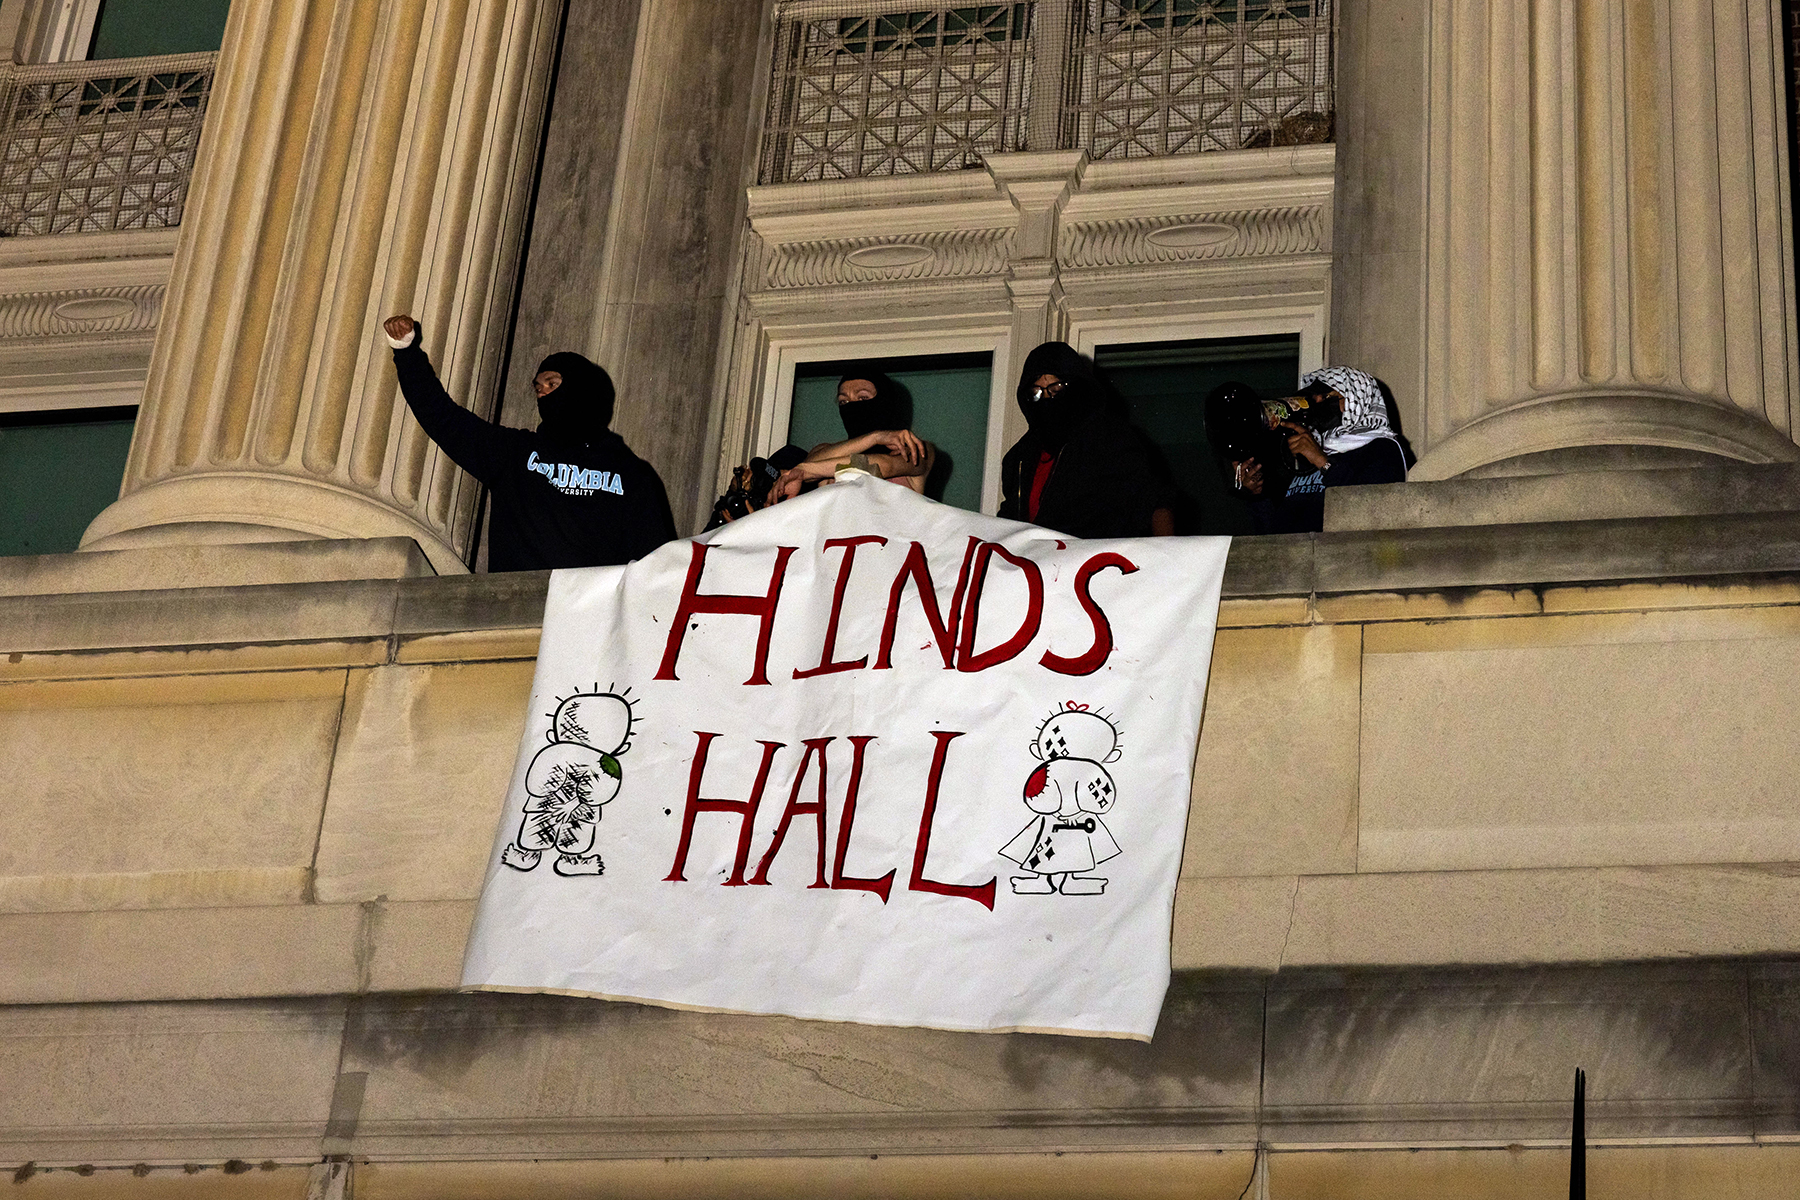 Columbia University Protesters Occupy Campus Building